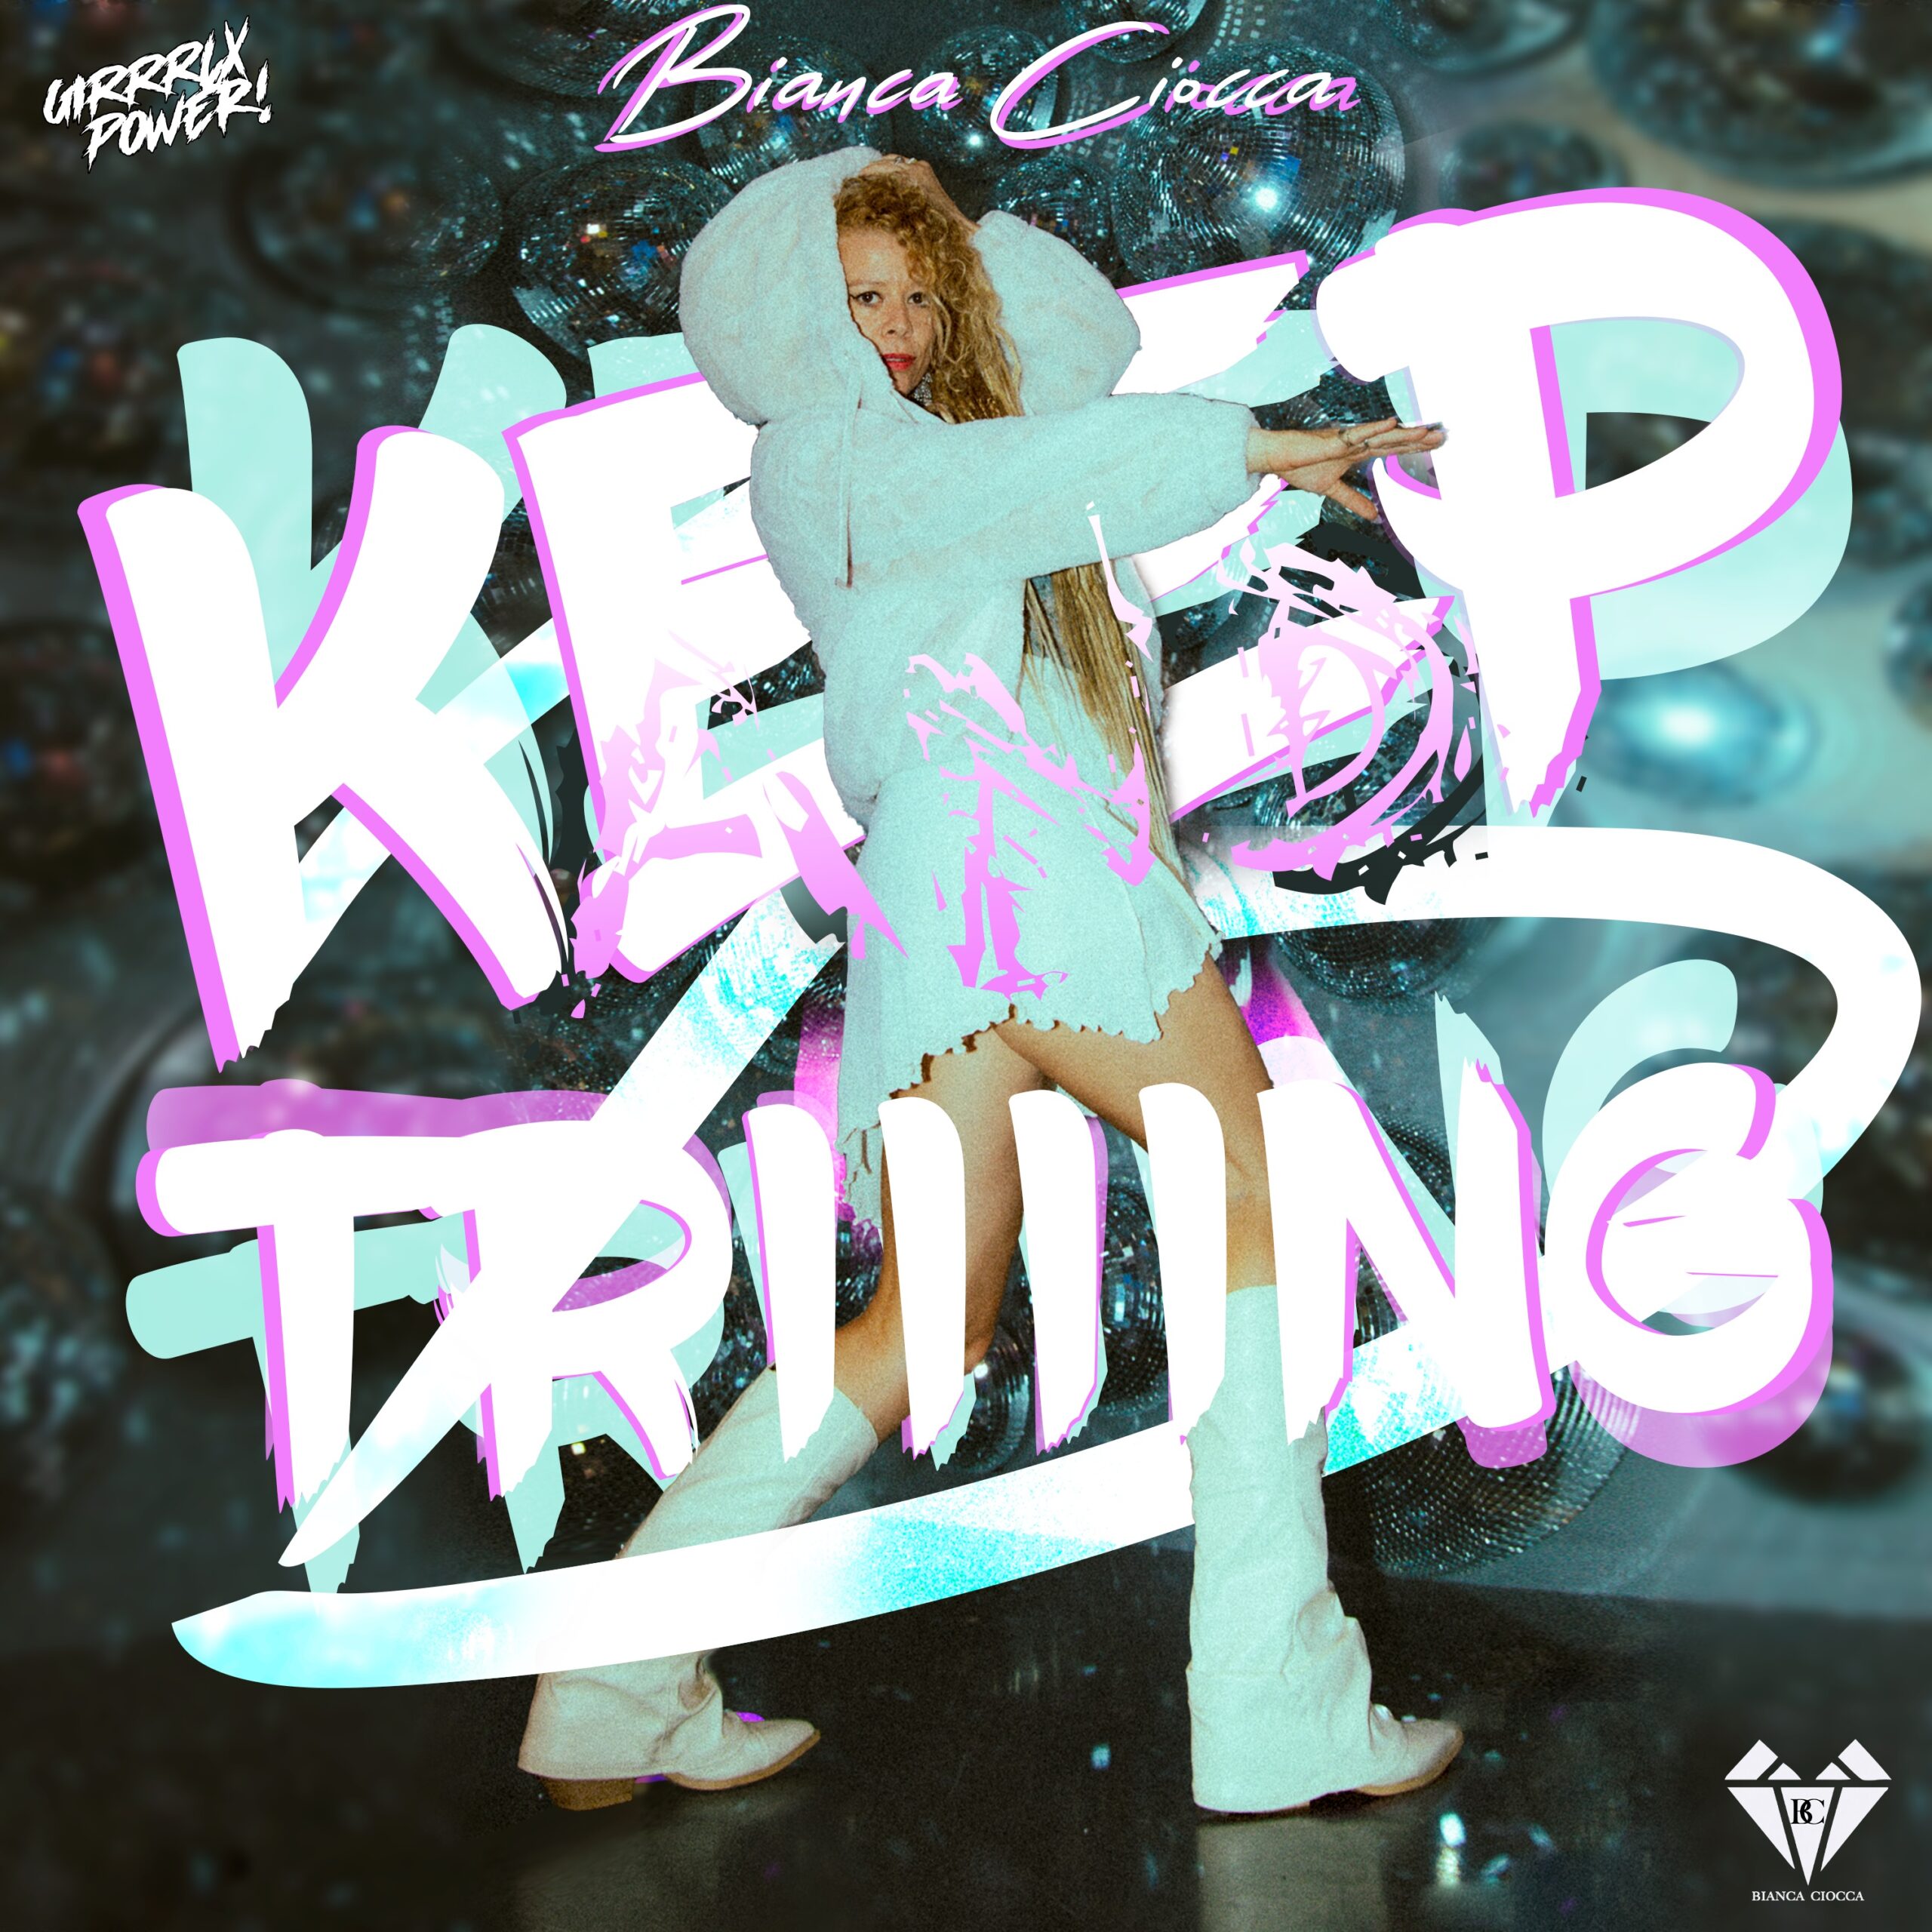 Bianca Ciocca: The Multifaceted Artist Making Waves with "Keep on TRIIIING"